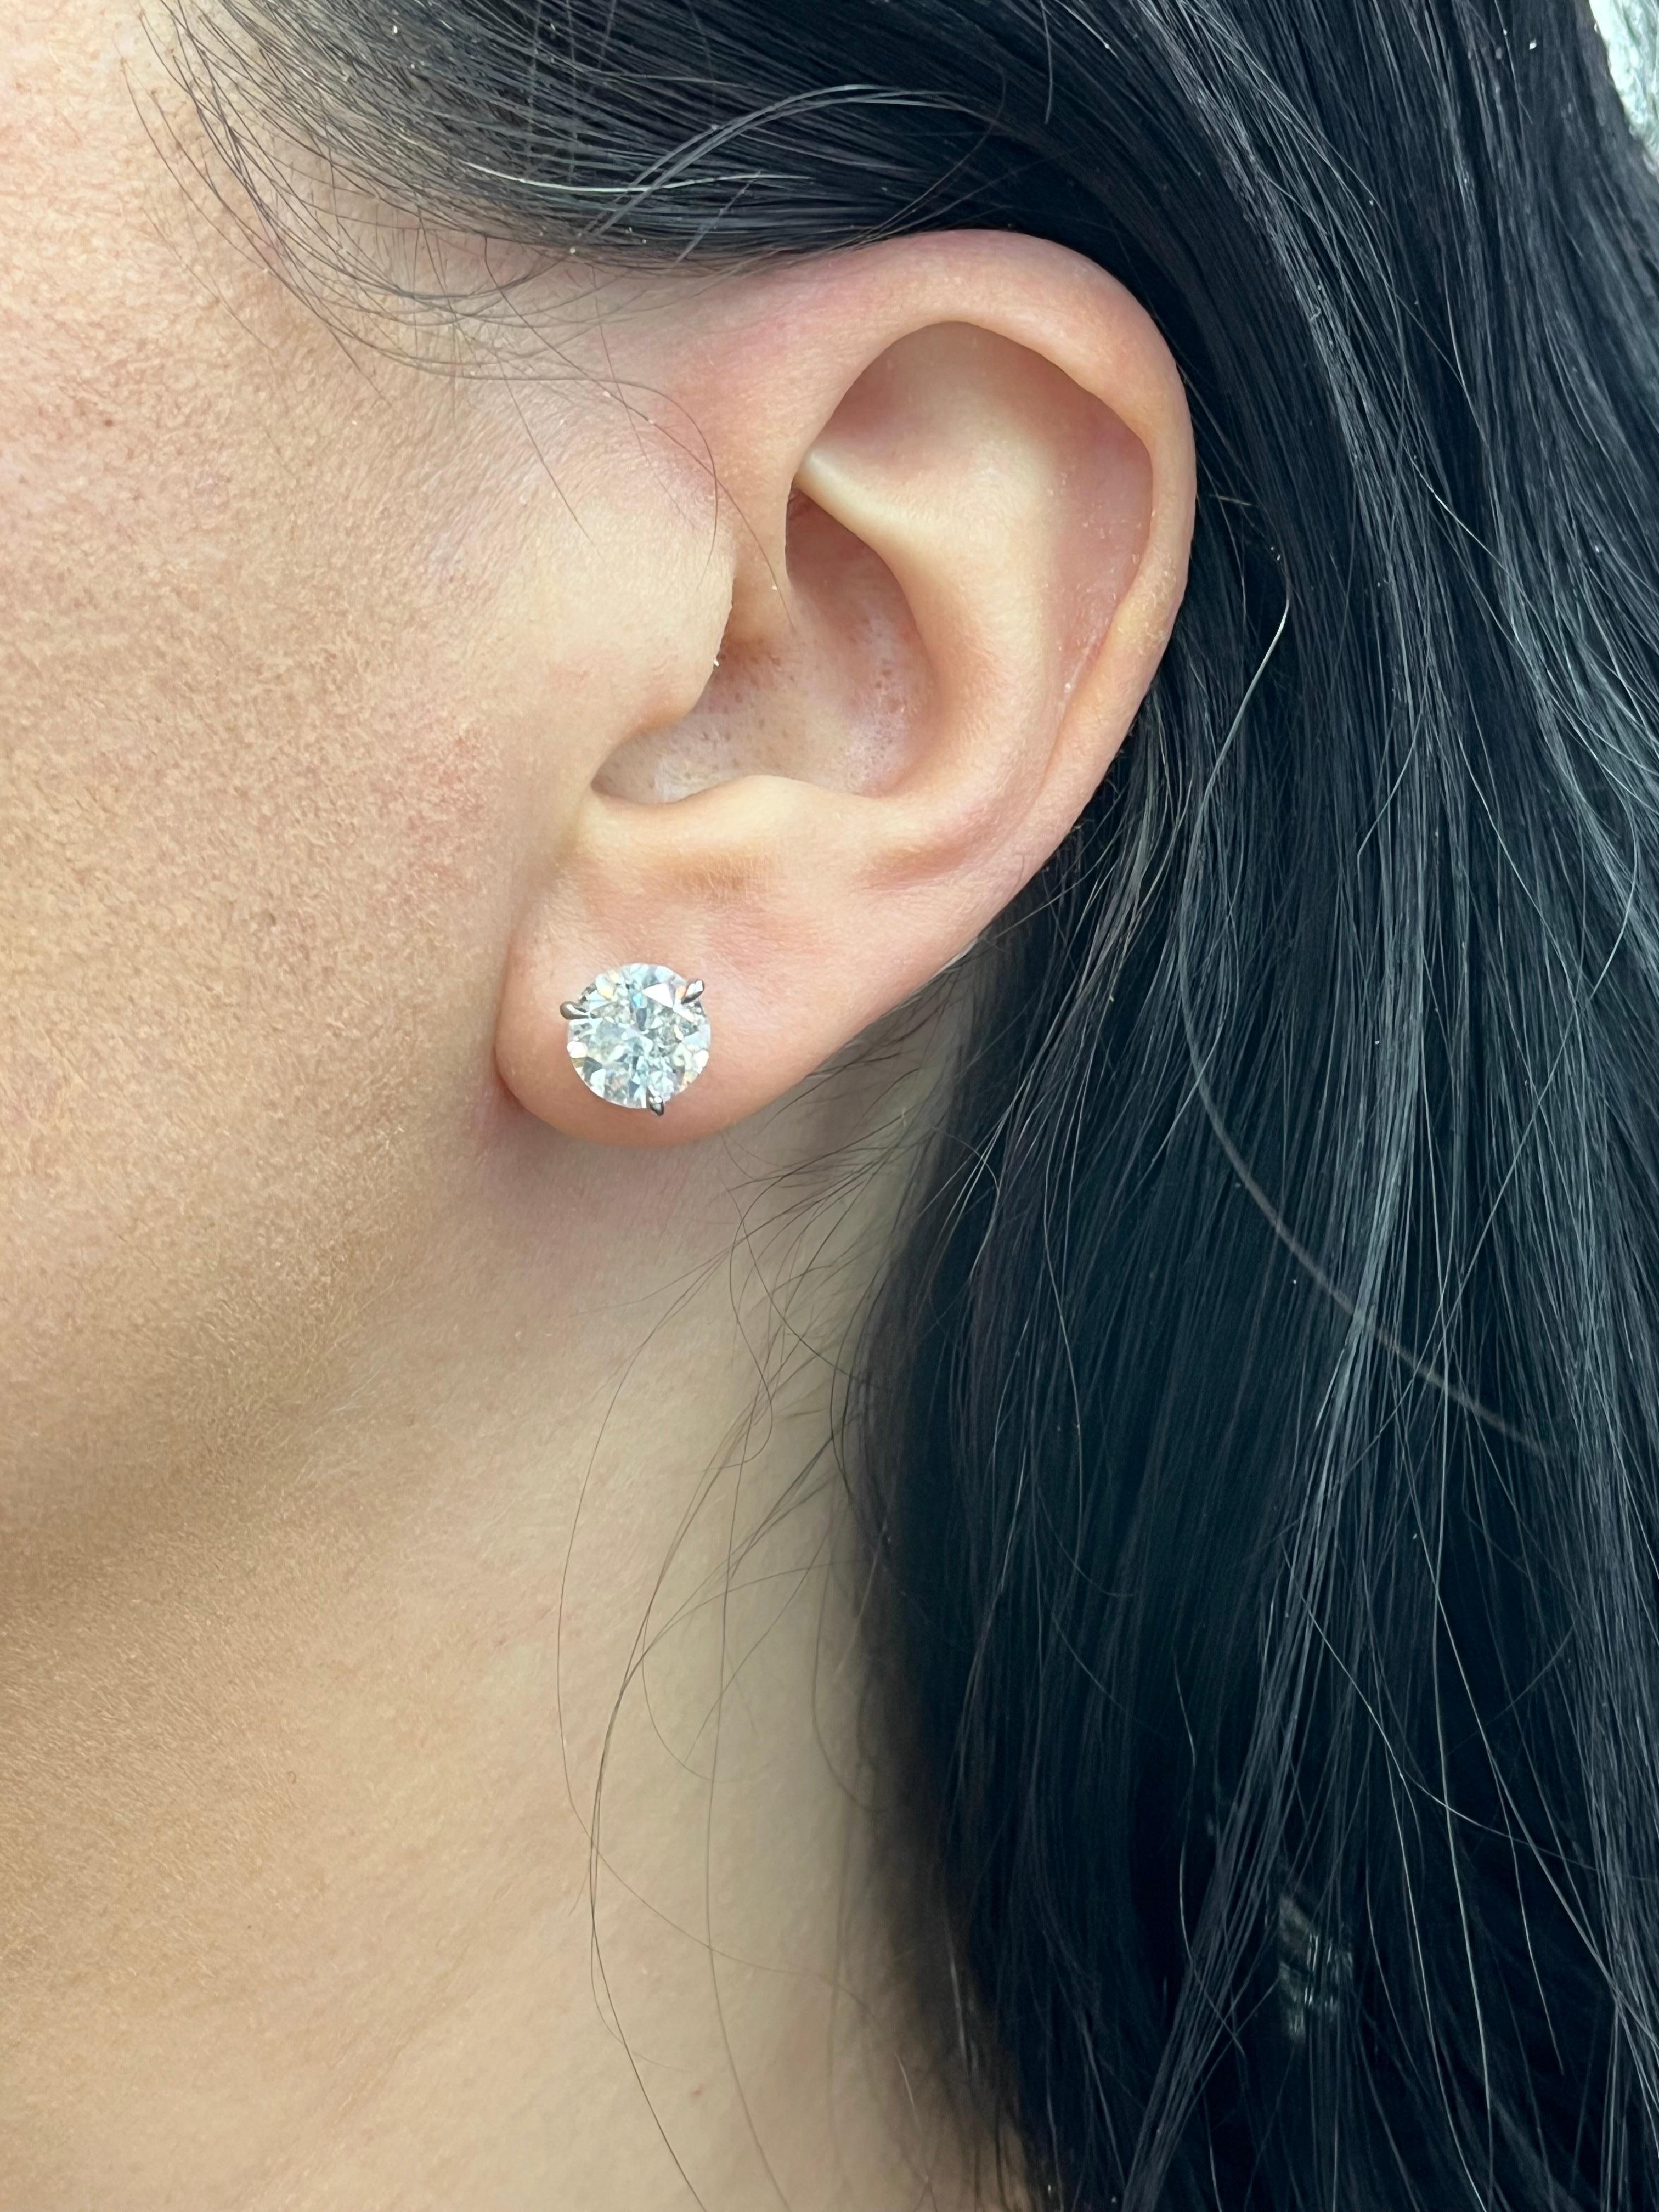 Diamond Stud Earrings 4.66 Carats G-H I1 18 Karat White Gold Champagne Setting In New Condition For Sale In New York, NY